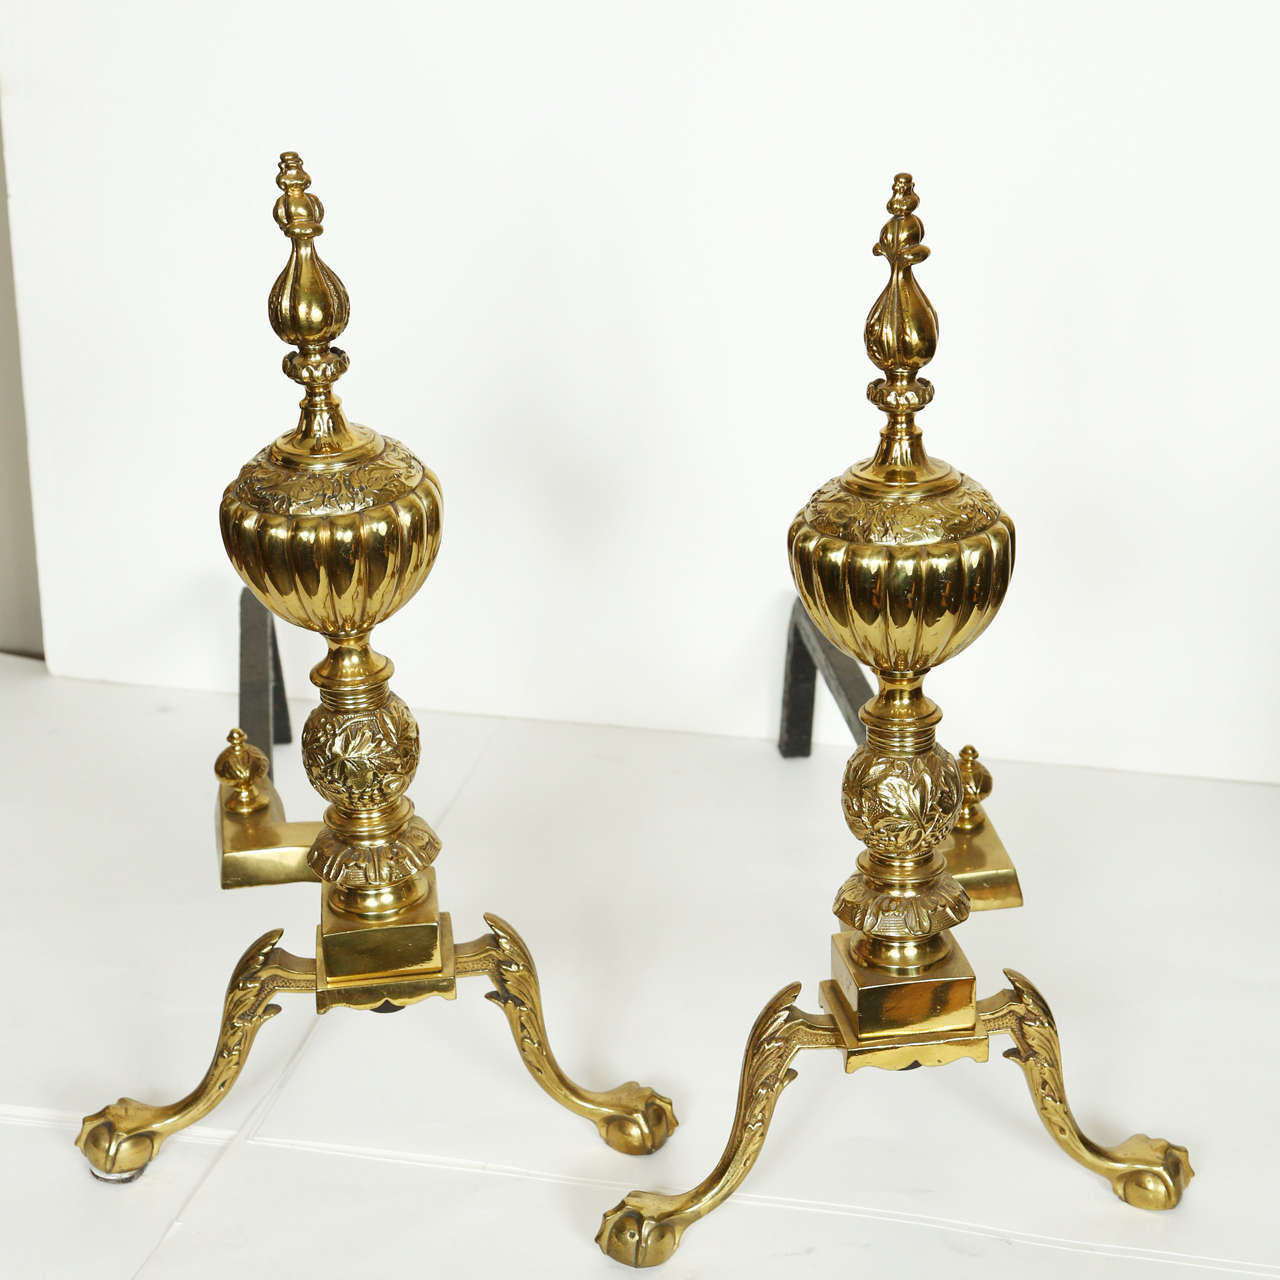 Pair of 18th Century Solid Brass Andirons